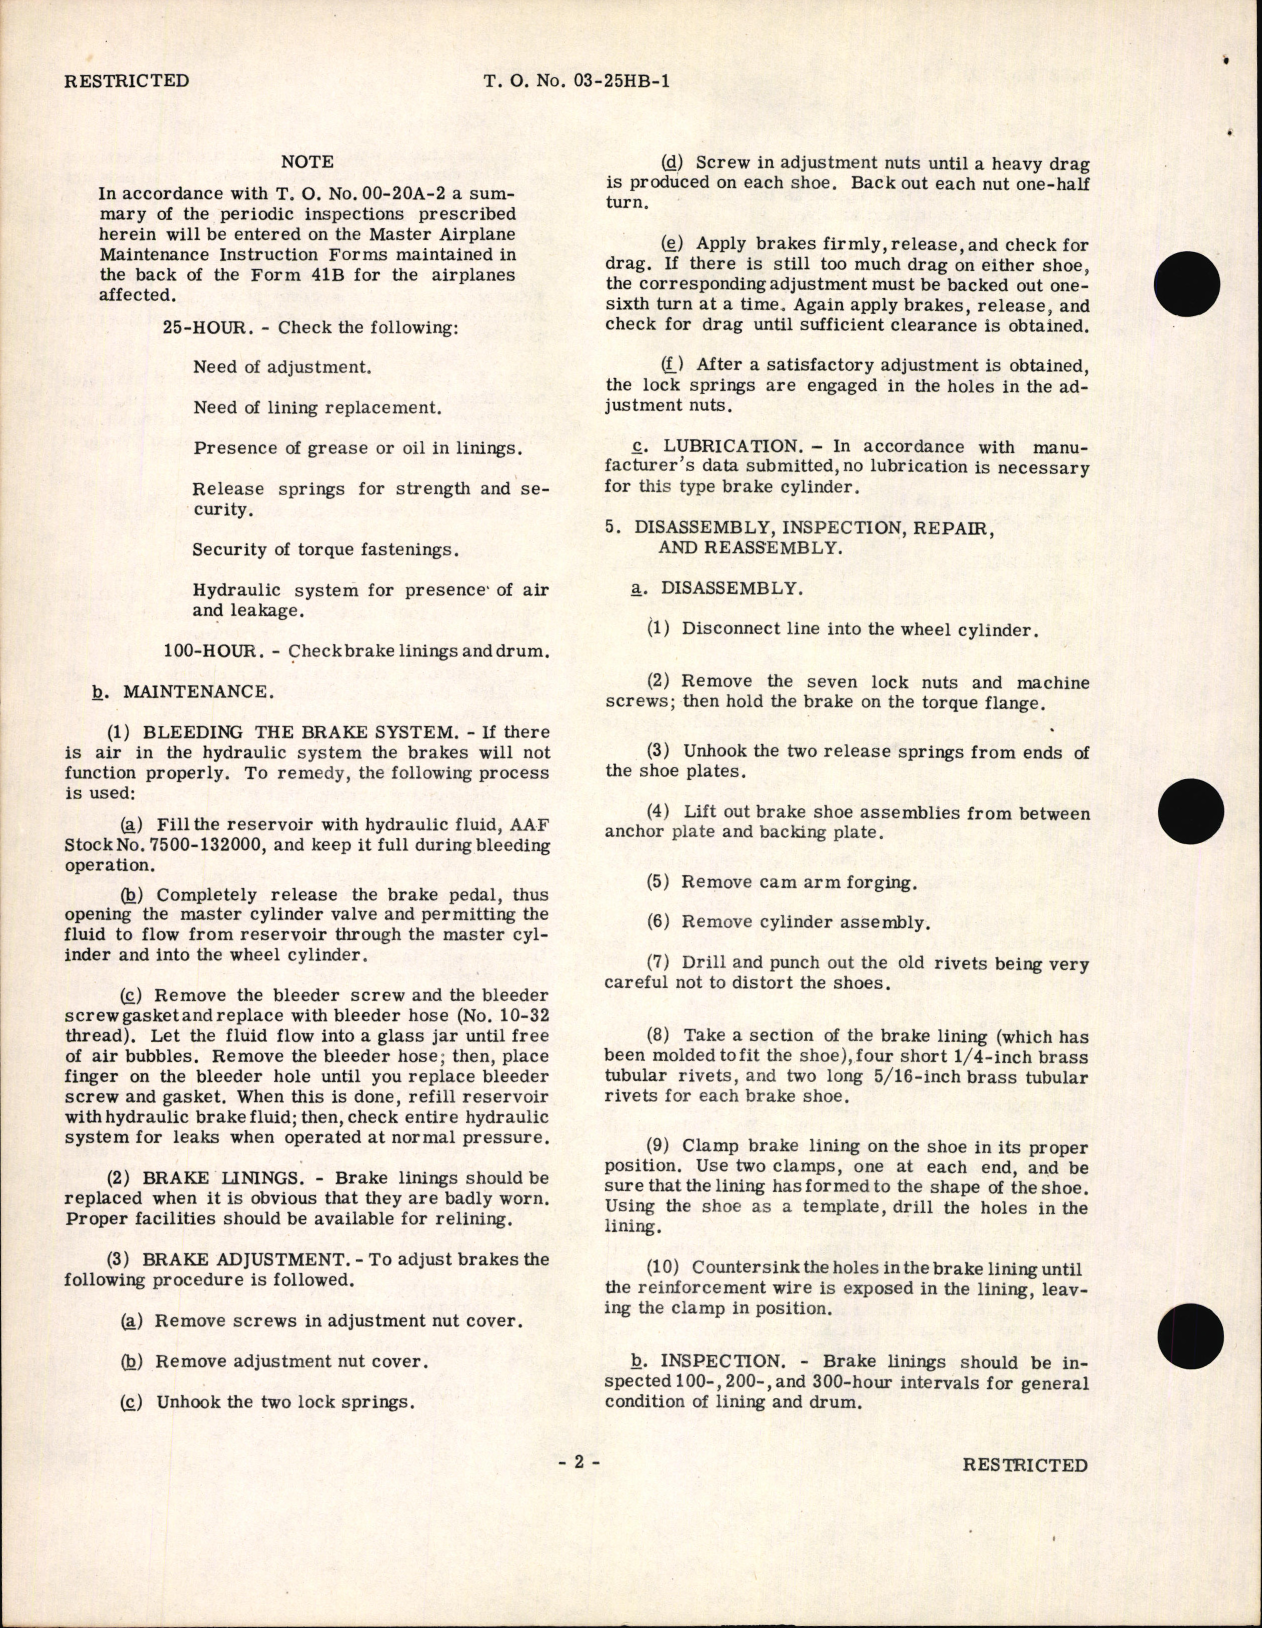 Sample page 6 from AirCorps Library document: Handbook of Instructions for Model 6 CA 94-90 and 6 CA 95-90 Hydraulic Brake Assembly